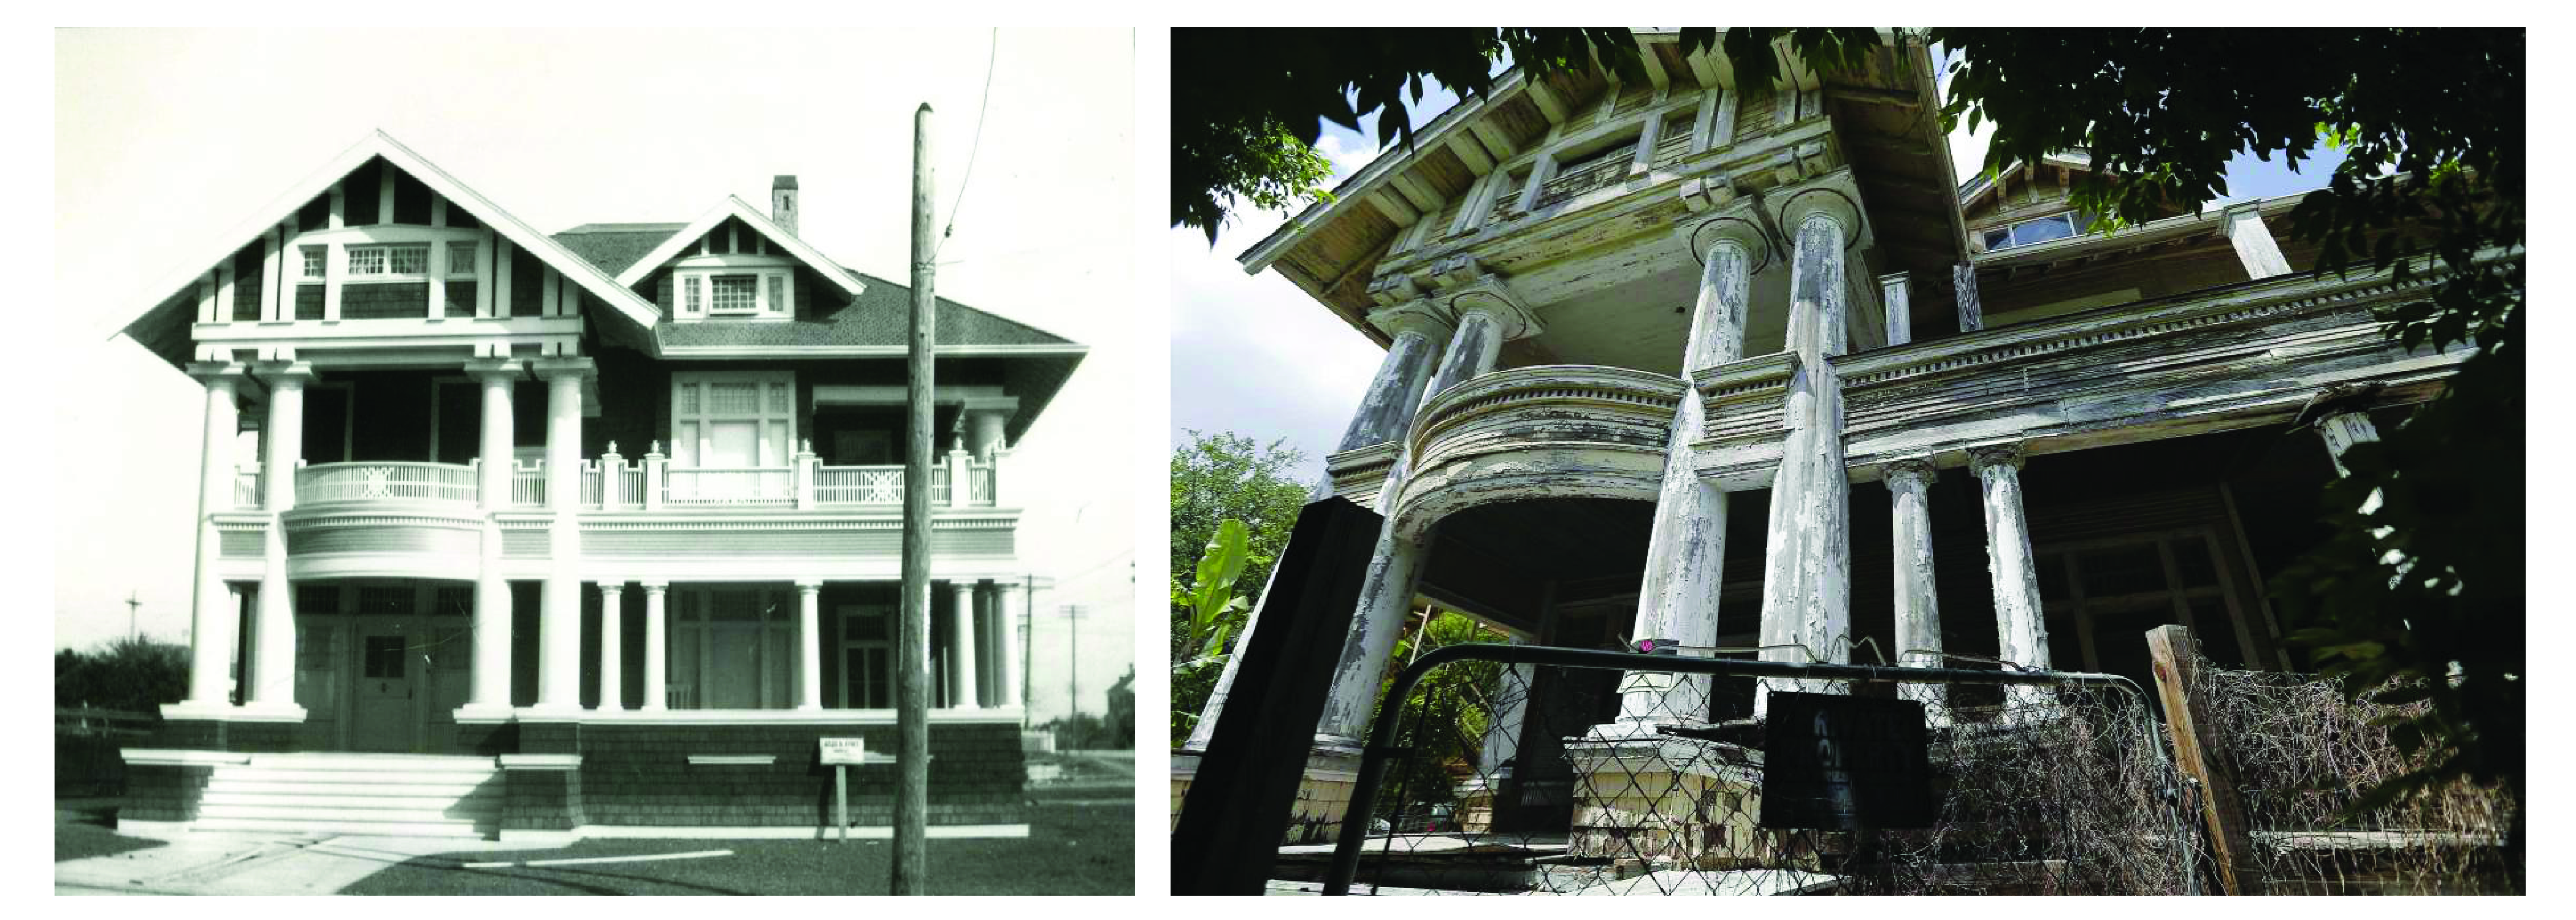 Kelso House 1906 (Credit: Alexander Architectural Archives at the UT Austin)  VS 2019 (Credits: PoP)